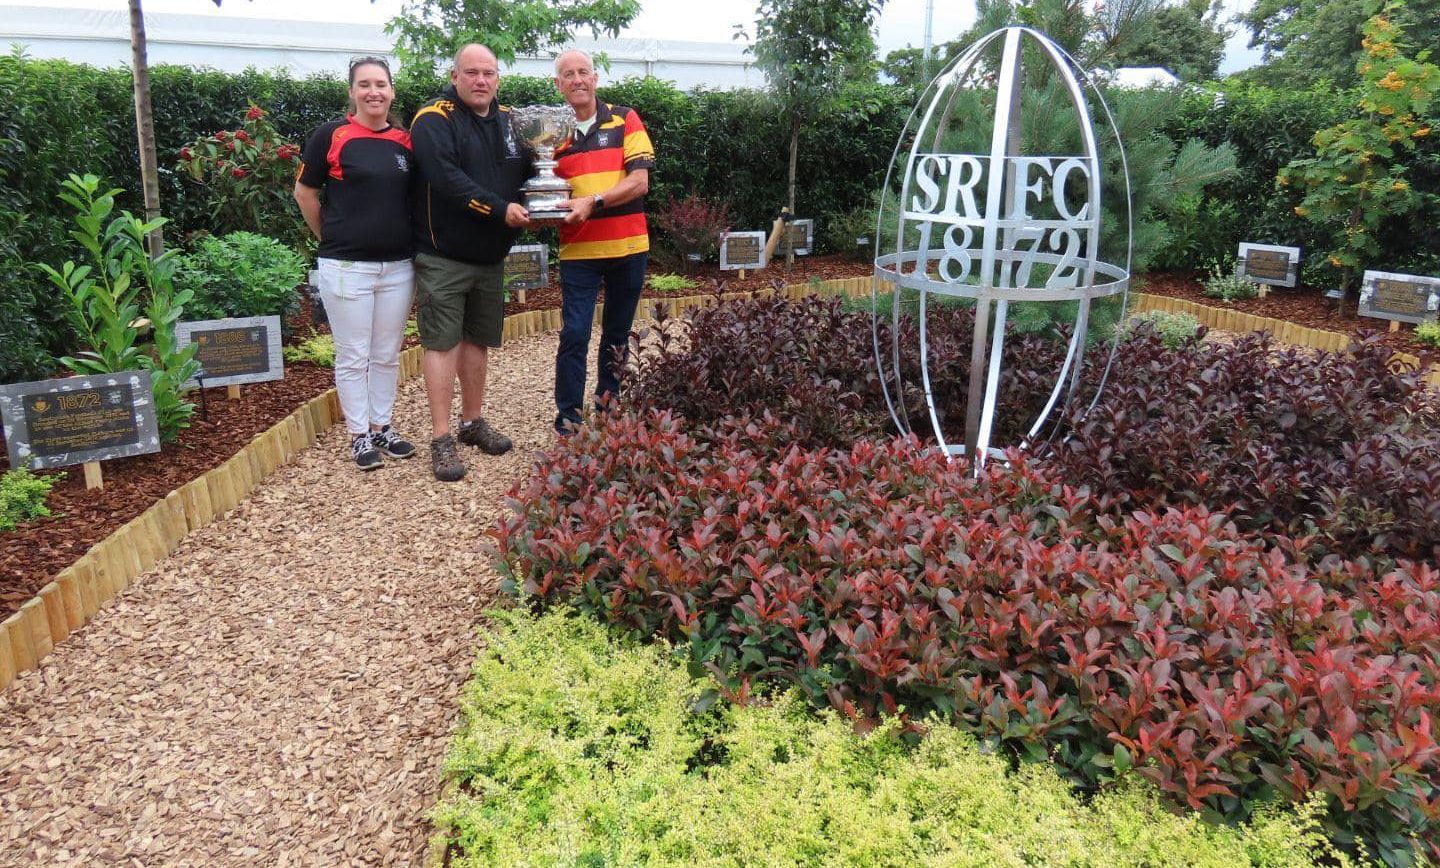 The Southport Rugby Club Garden at Southport Flower Show. Photo by Andrew Brown Media